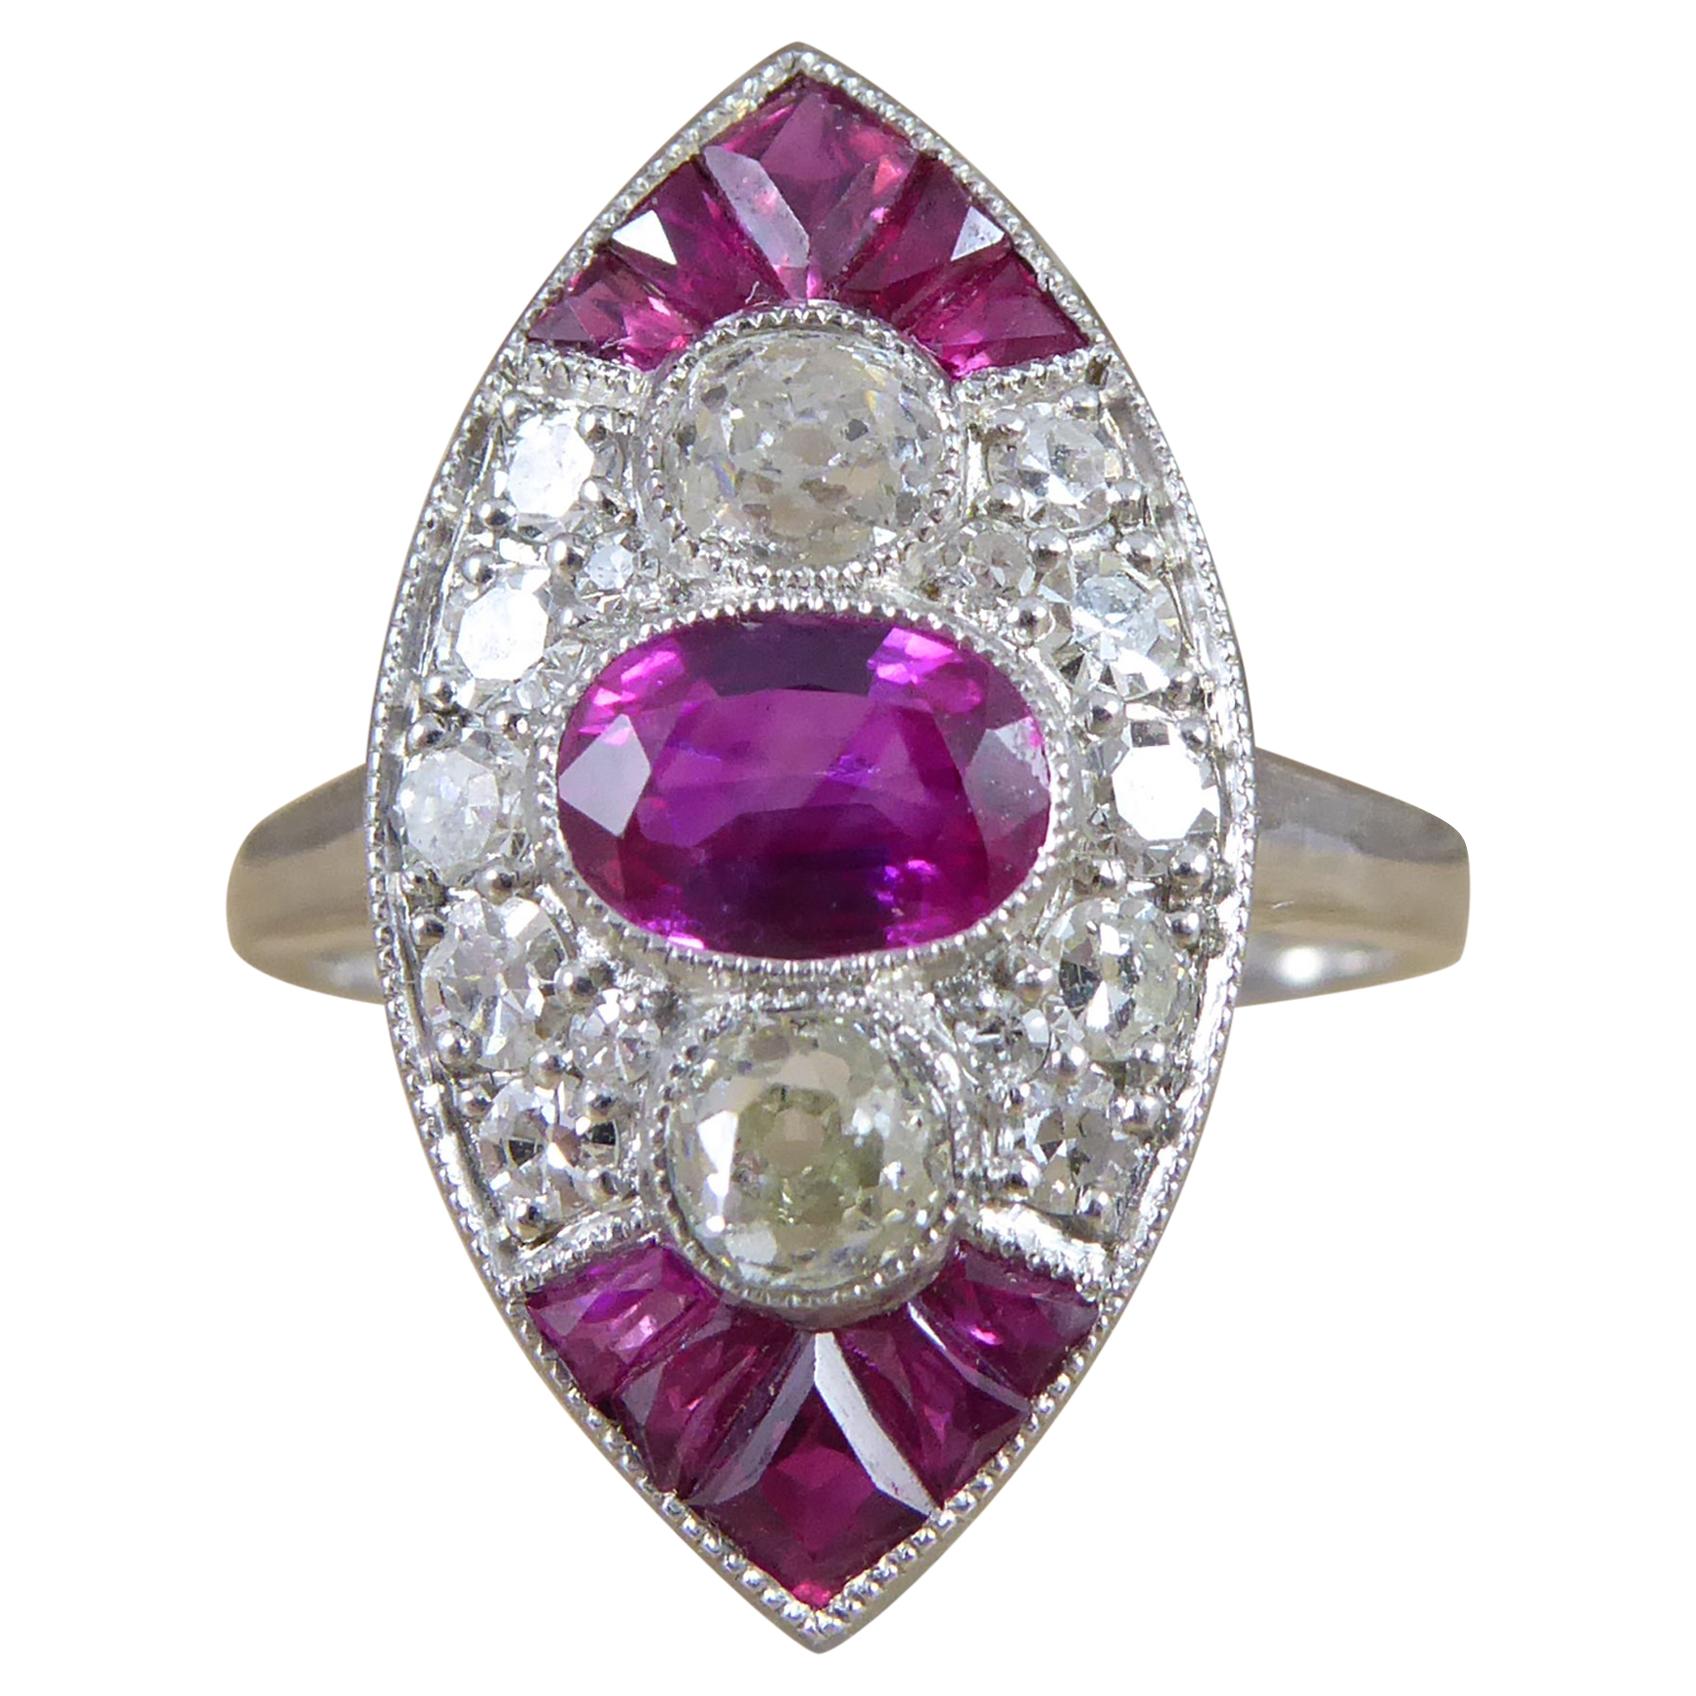 1930s Art Deco Ruby and Diamond Ring, Old European Cut, Marquise Shaped Setting